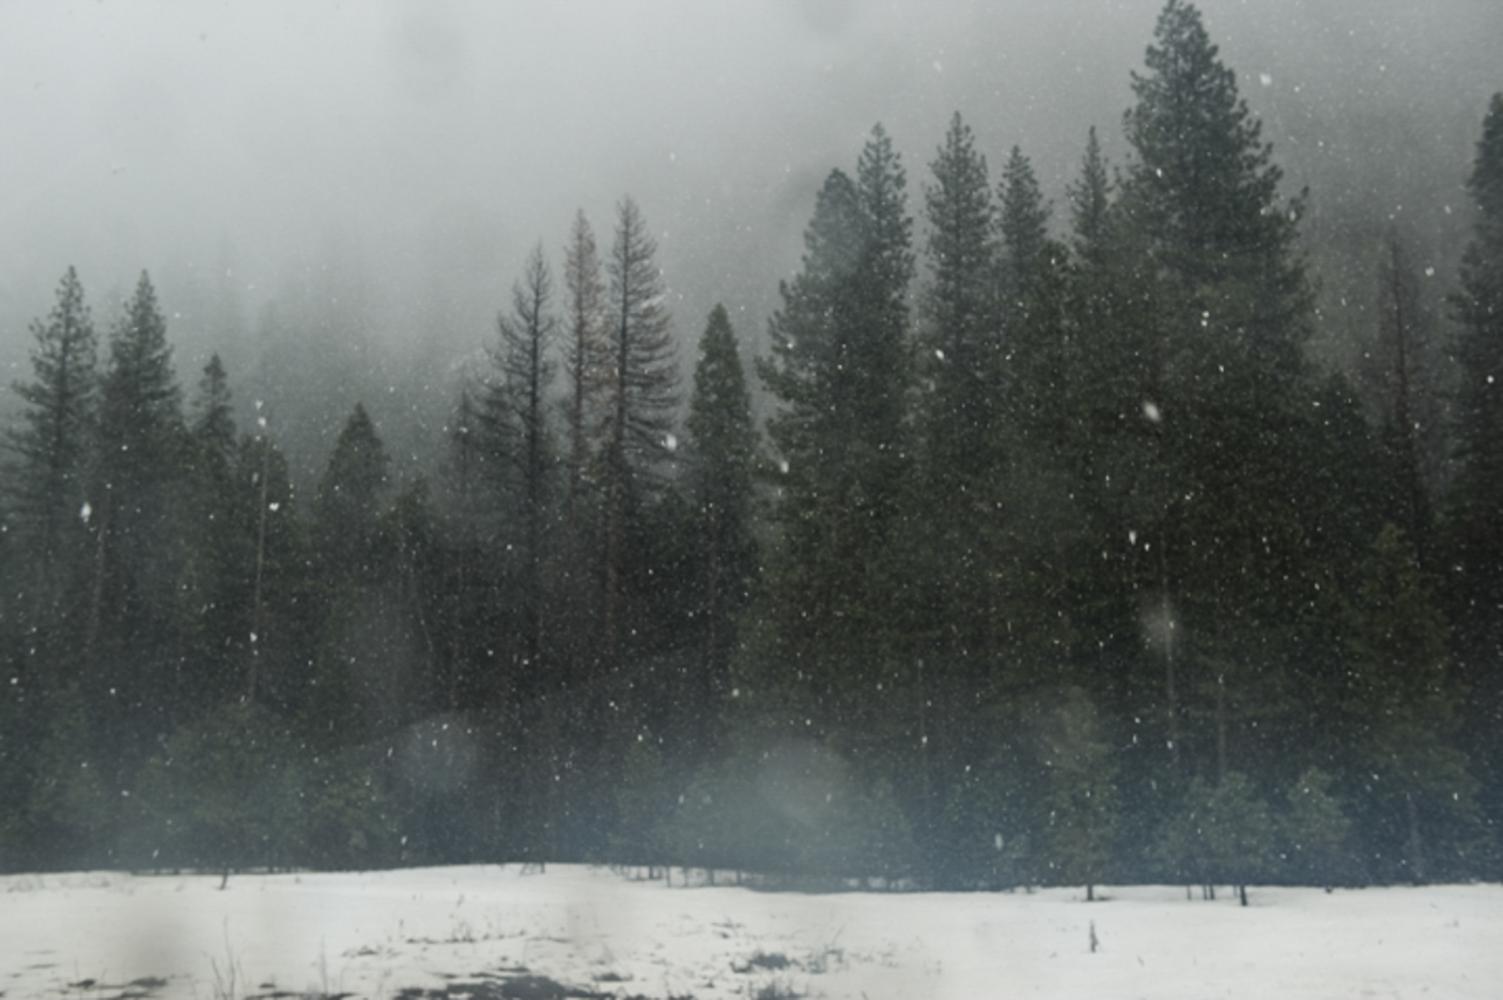 The first snow of winter in the valley of Yosemite National Park, California.